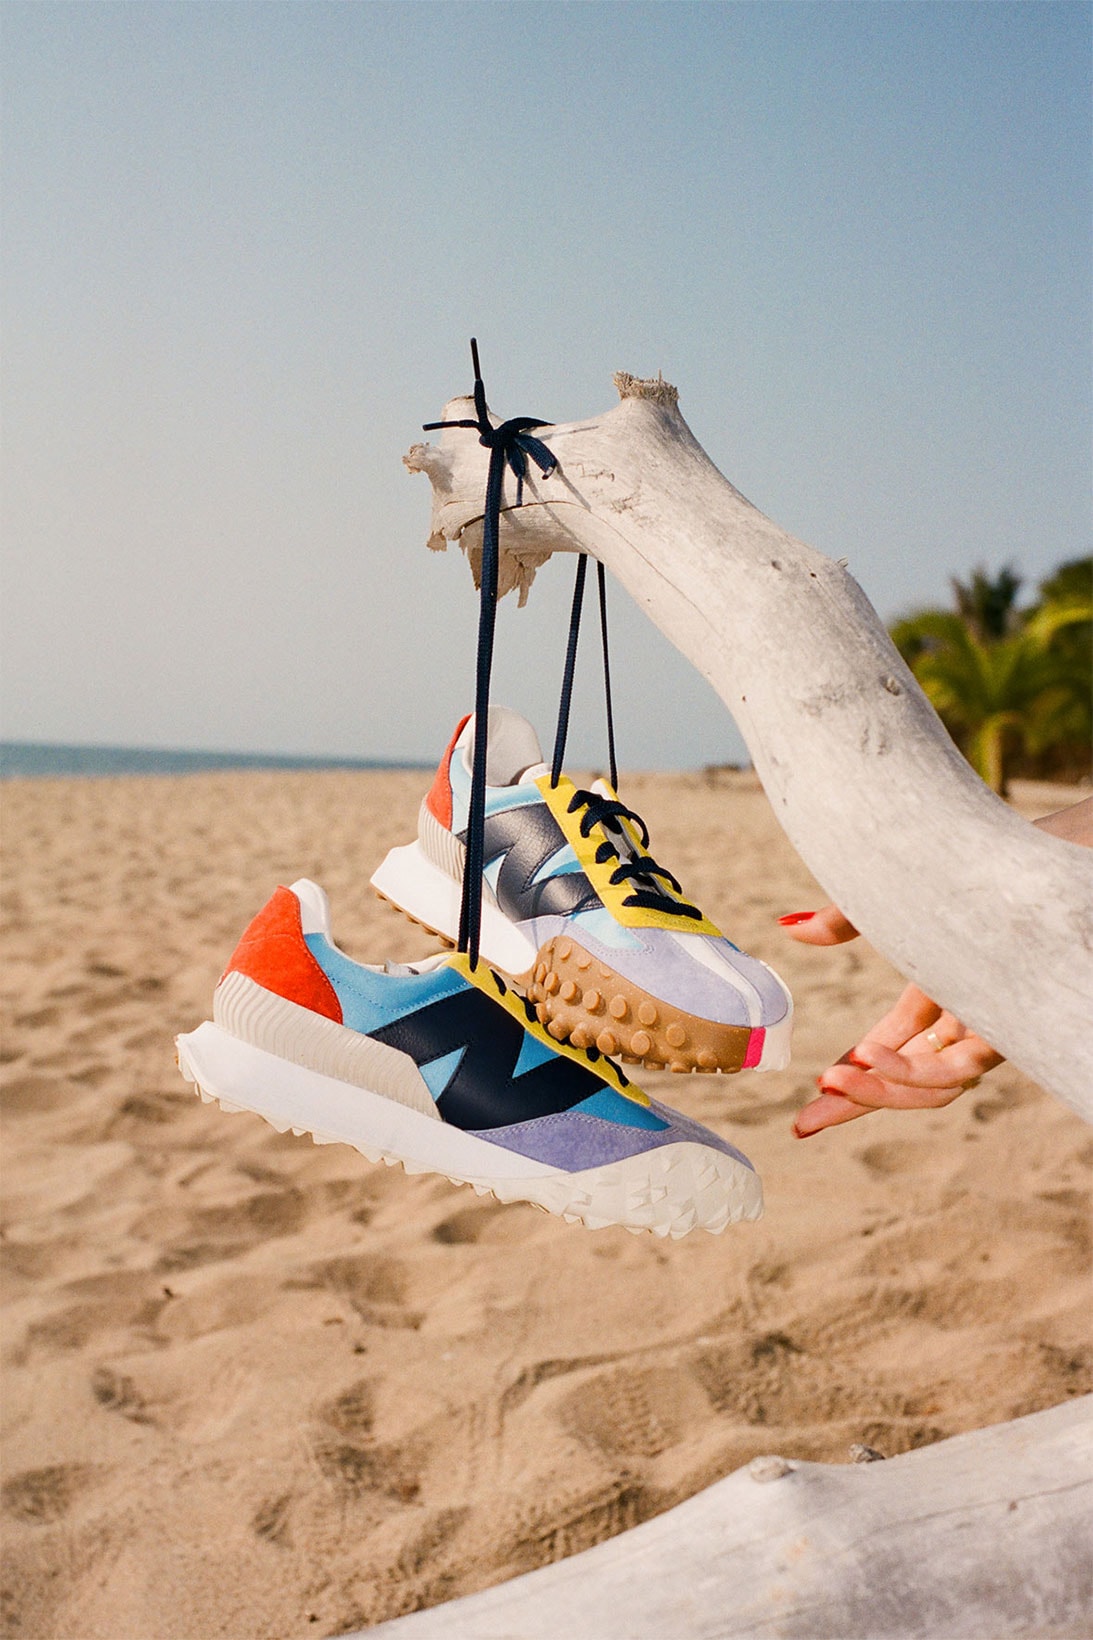 STAUD New Balance XC-72 Surfing Collaboration Sneakers Apparel Release Date